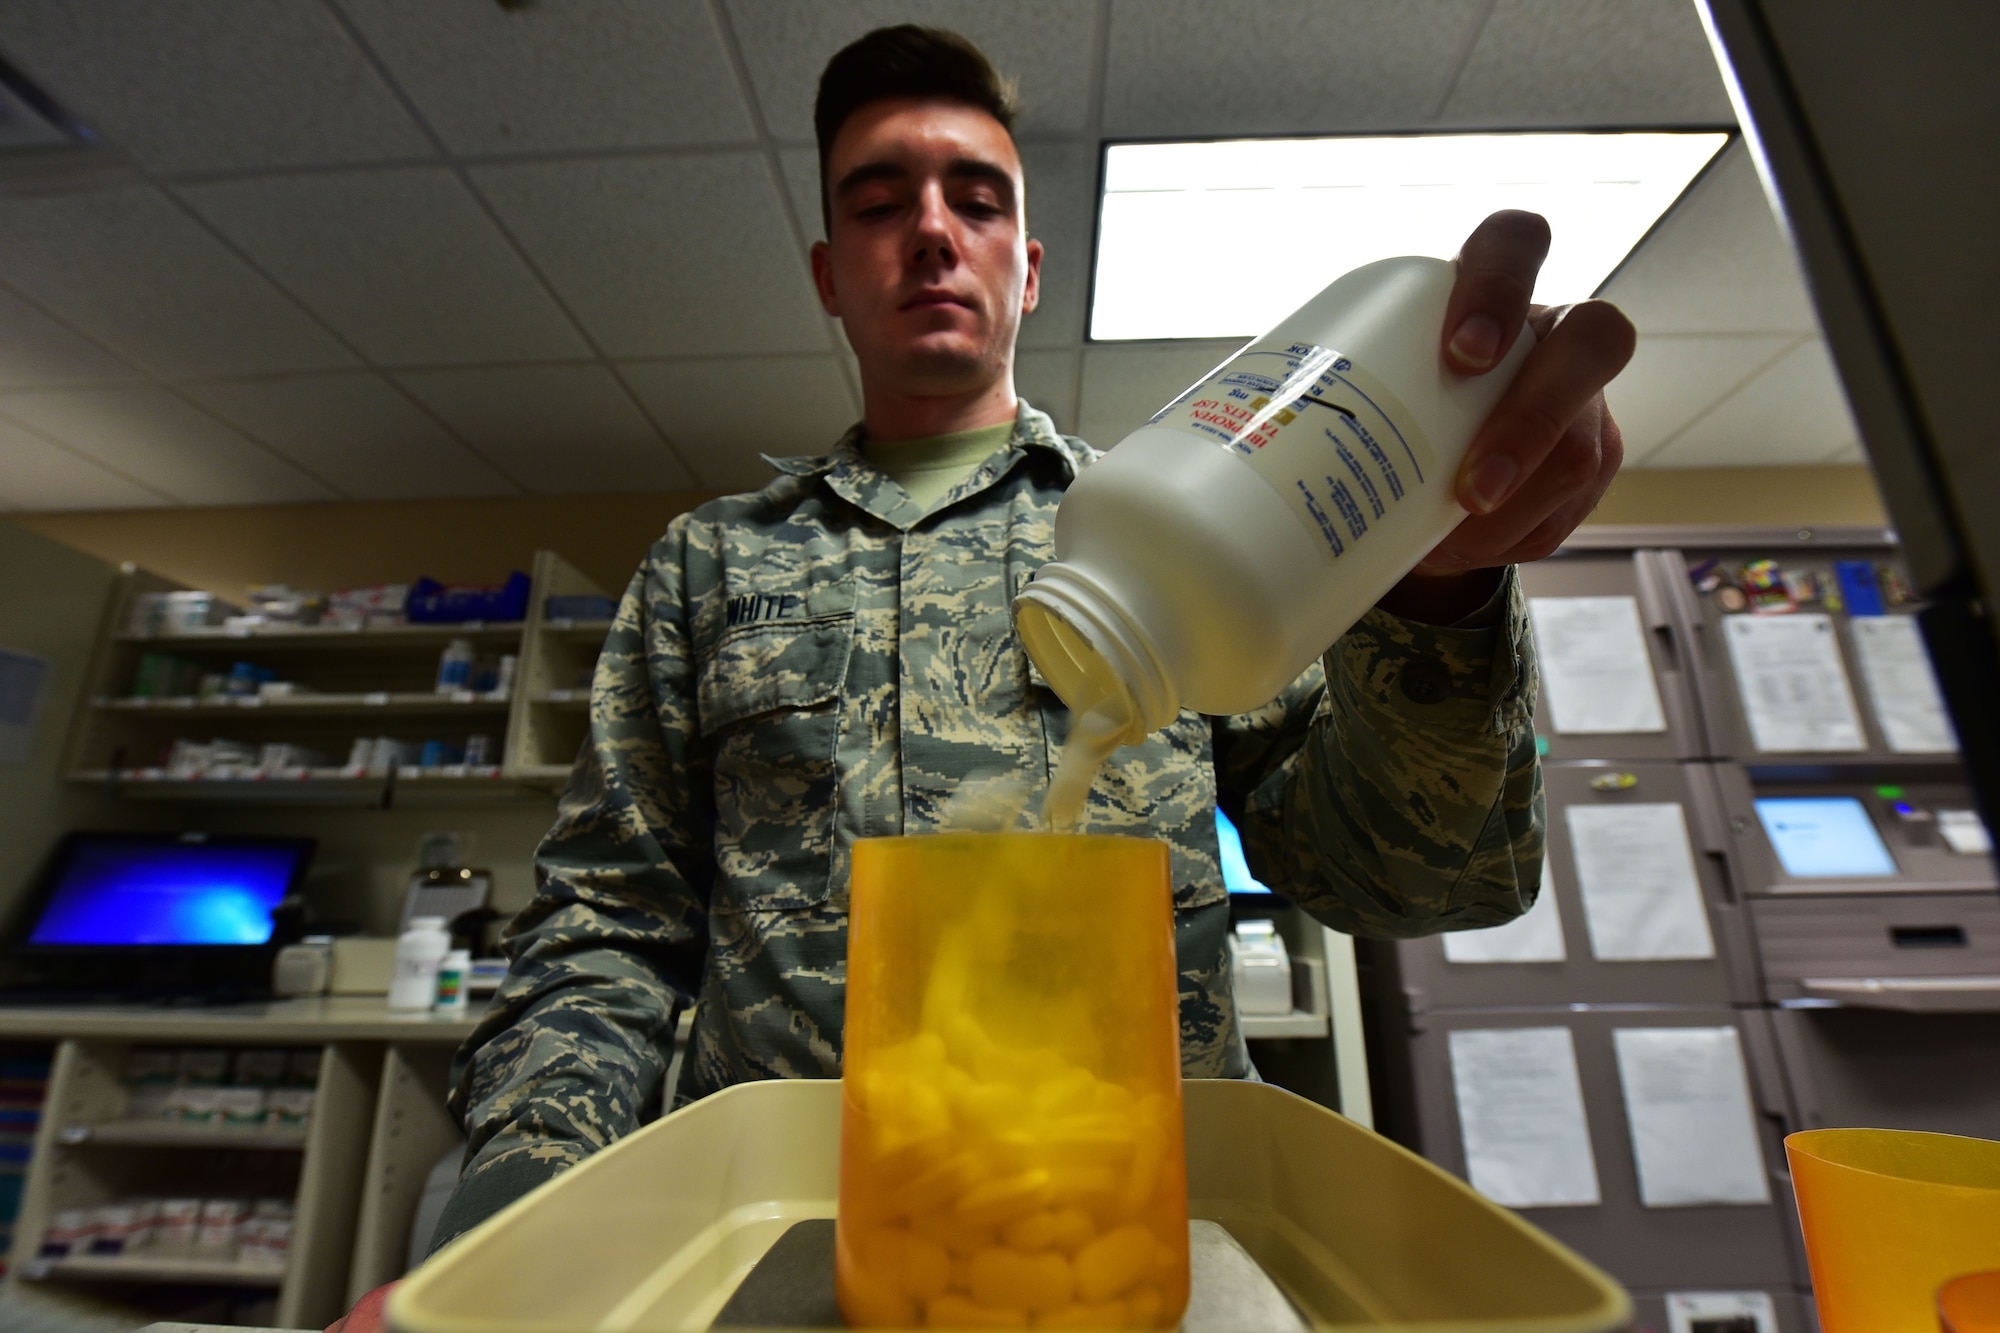 Airman 1st Class Joshua White, 19th Medical Support Squadron pharmacy technician, weighs pill capsules Aug. 24, 2017 at Little Rock Air Force Base, Ark. The Tricate Mail Order Pharmacy is available for members on deployment or temporary duty assignment who are in need of medication. (U.S. Air Force photo by Airman Rhett Isbell)